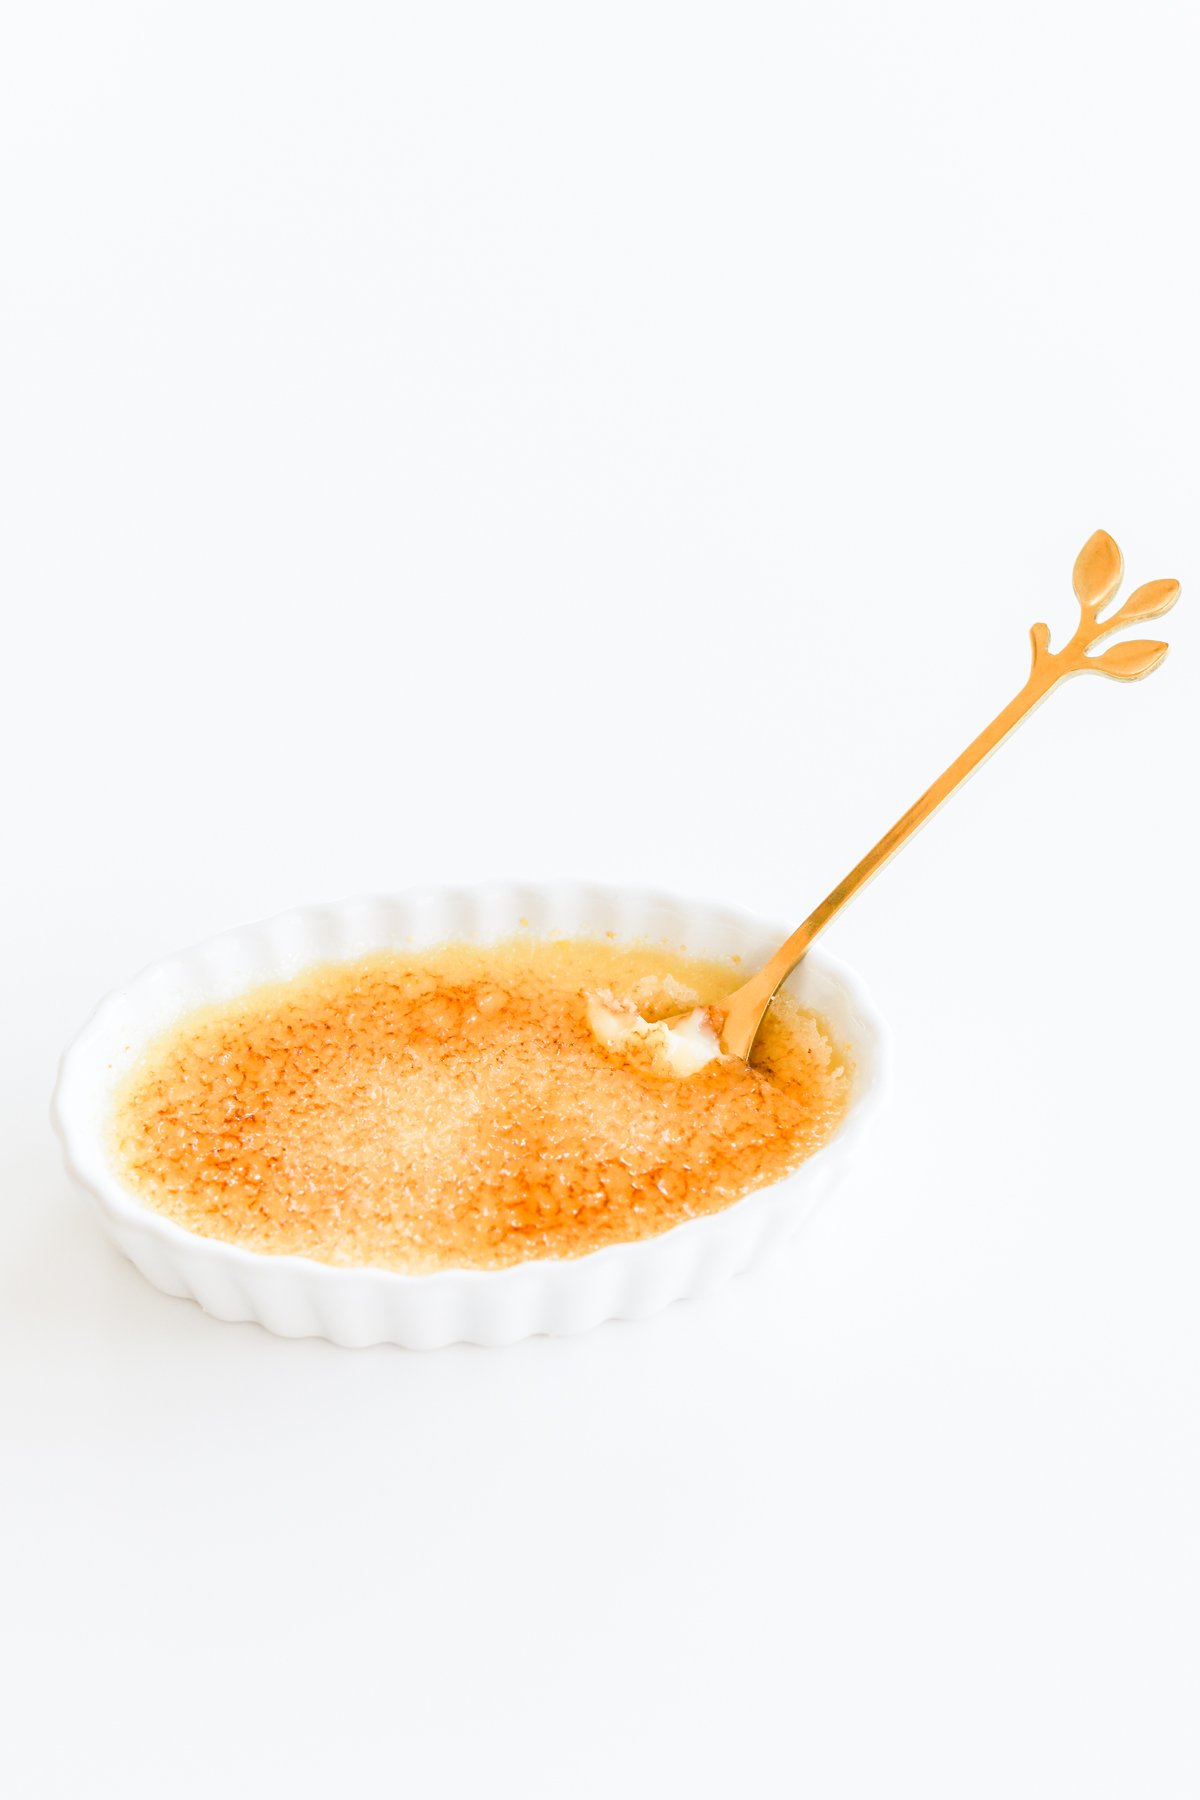 An easy creme brulee with a spoon.